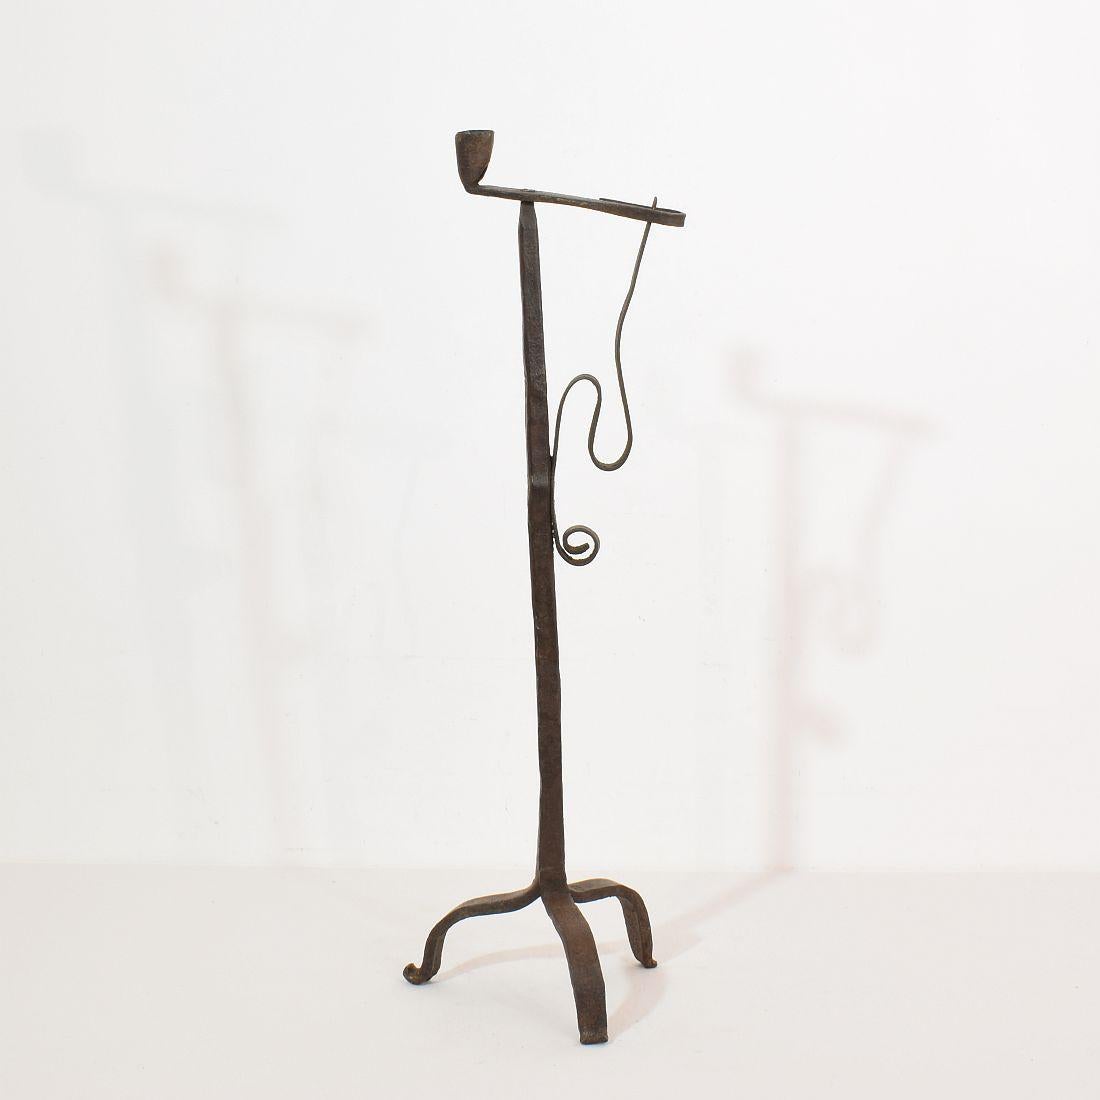 Very old and beautiful hand forged iron candleholder
France, circa 1700-1750.